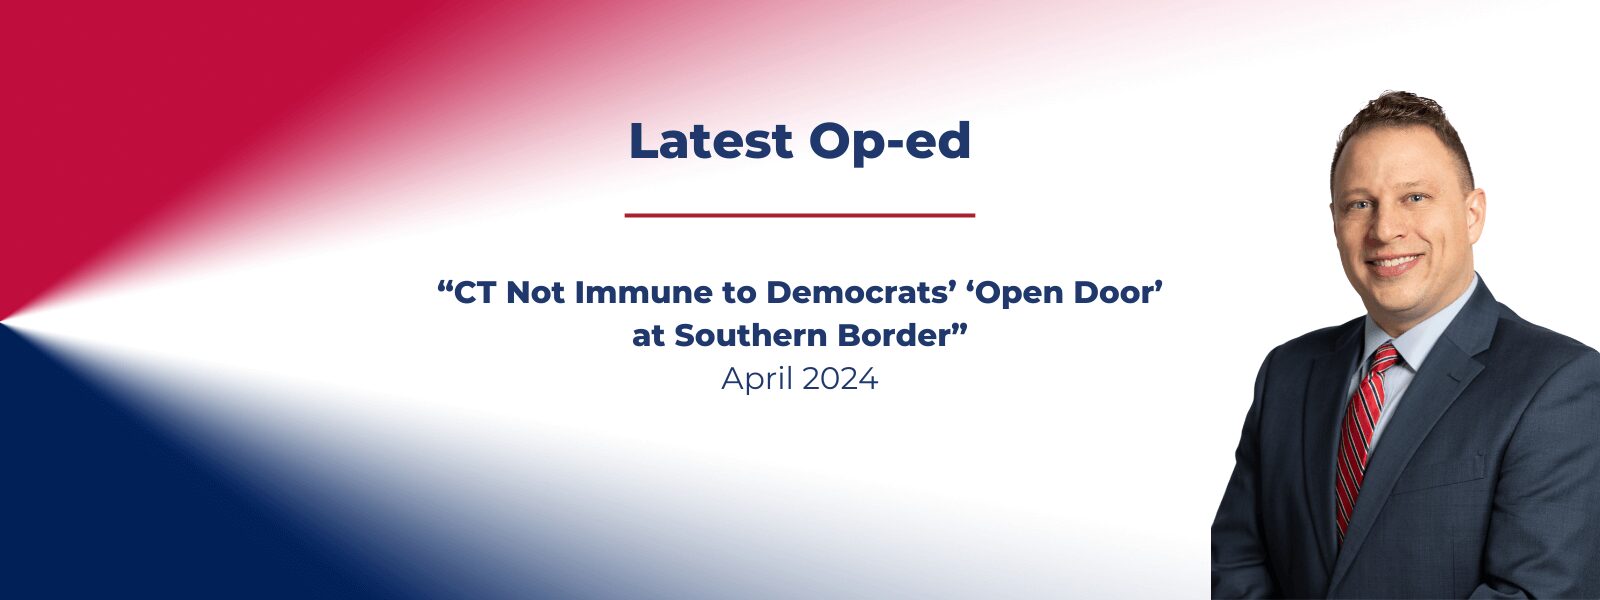 Latest Op-ed | "CT Not Immune to Democrats’ ‘Open Door’ at Southern Border" (April 2024)